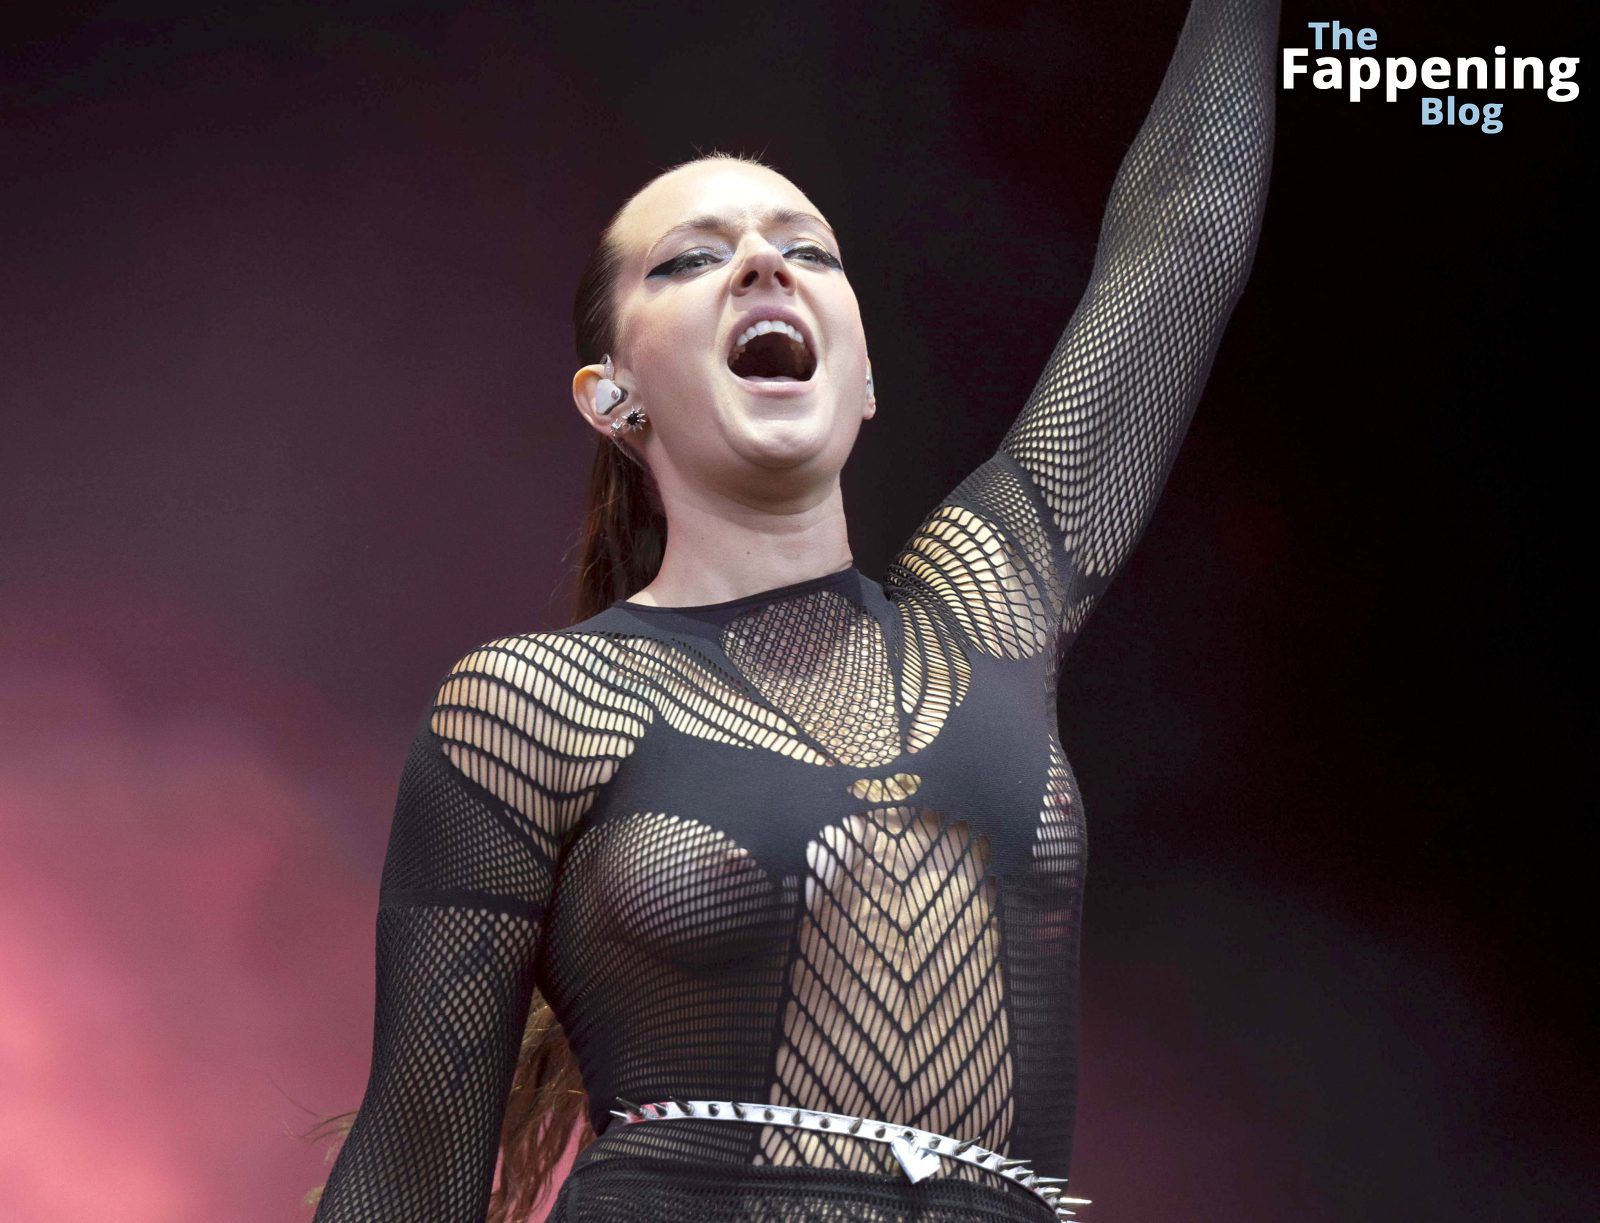 Tove-Lo-Way-Out-West-Festival-Sexy-Fishnet-Boobs-Nipples-2-thefappeningblog.com_.jpg